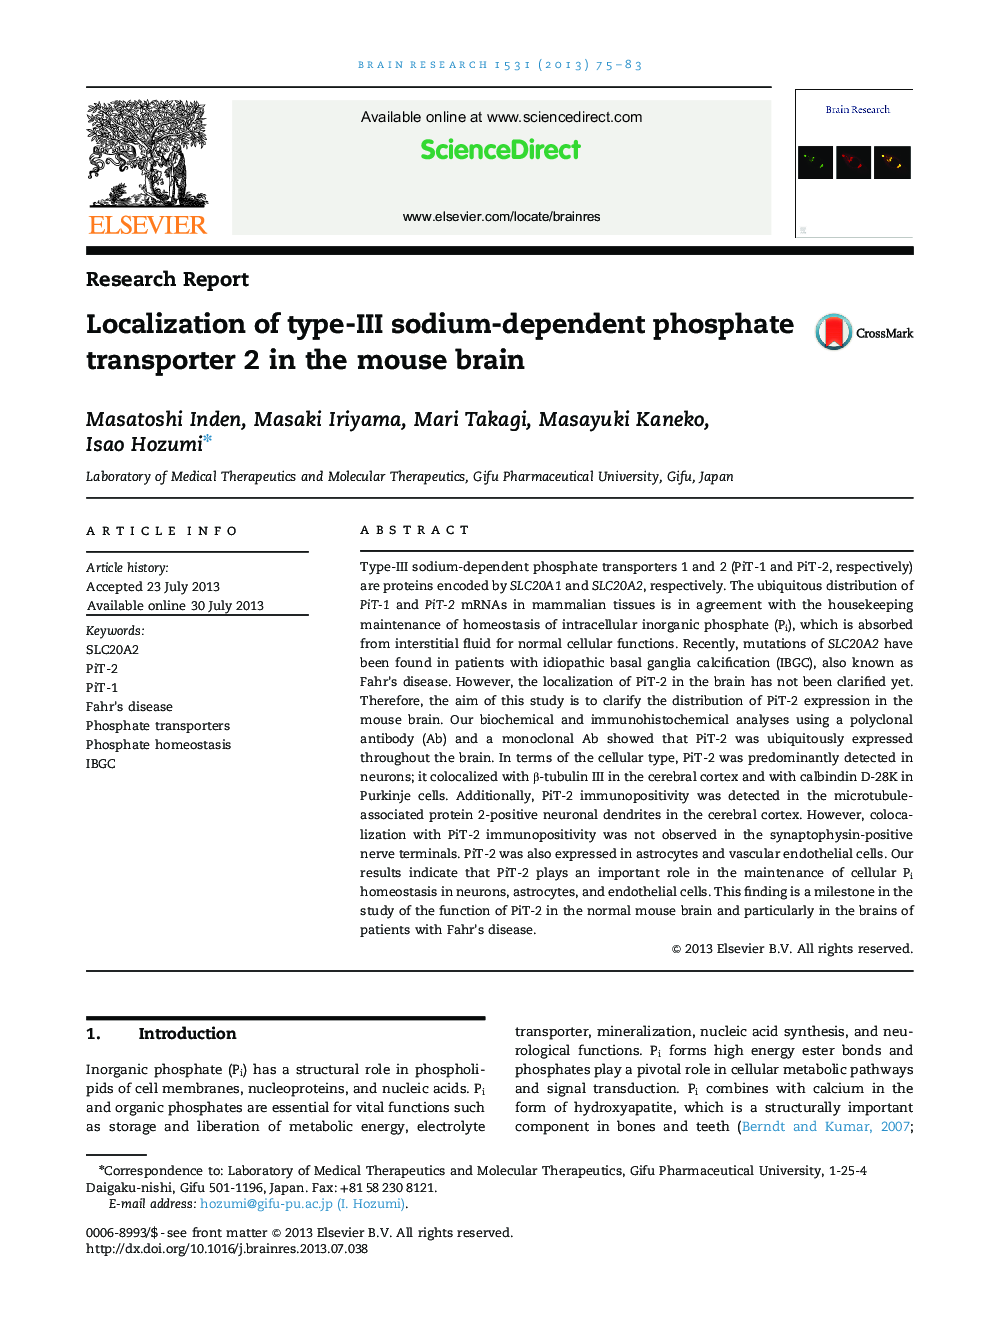 Research ReportLocalization of type-III sodium-dependent phosphate transporter 2 in the mouse brain